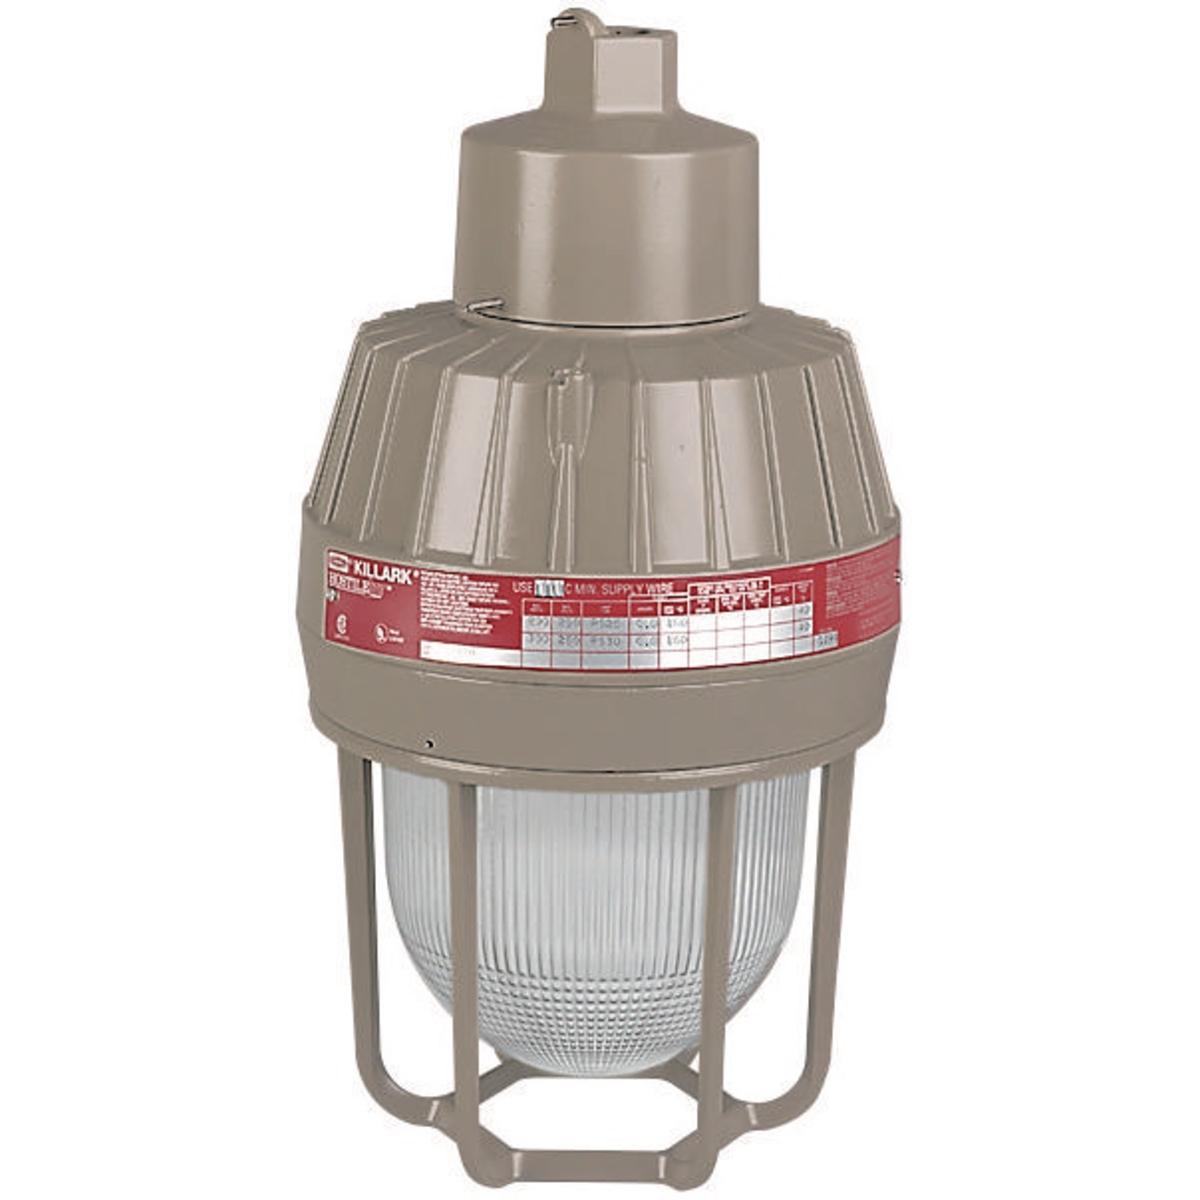 Hubbell EMS070A2G HID 70W HPS Quadri-Volt 3/4" Pendant with Guard  ; Four light sources—Incandescent, compact fluorescent, high pressure sodium and metal halide ; Mounting choice—Pendant, ceiling, 25˚ stanchion or 90˚ wall mount, all with “wireless” design that allows fast